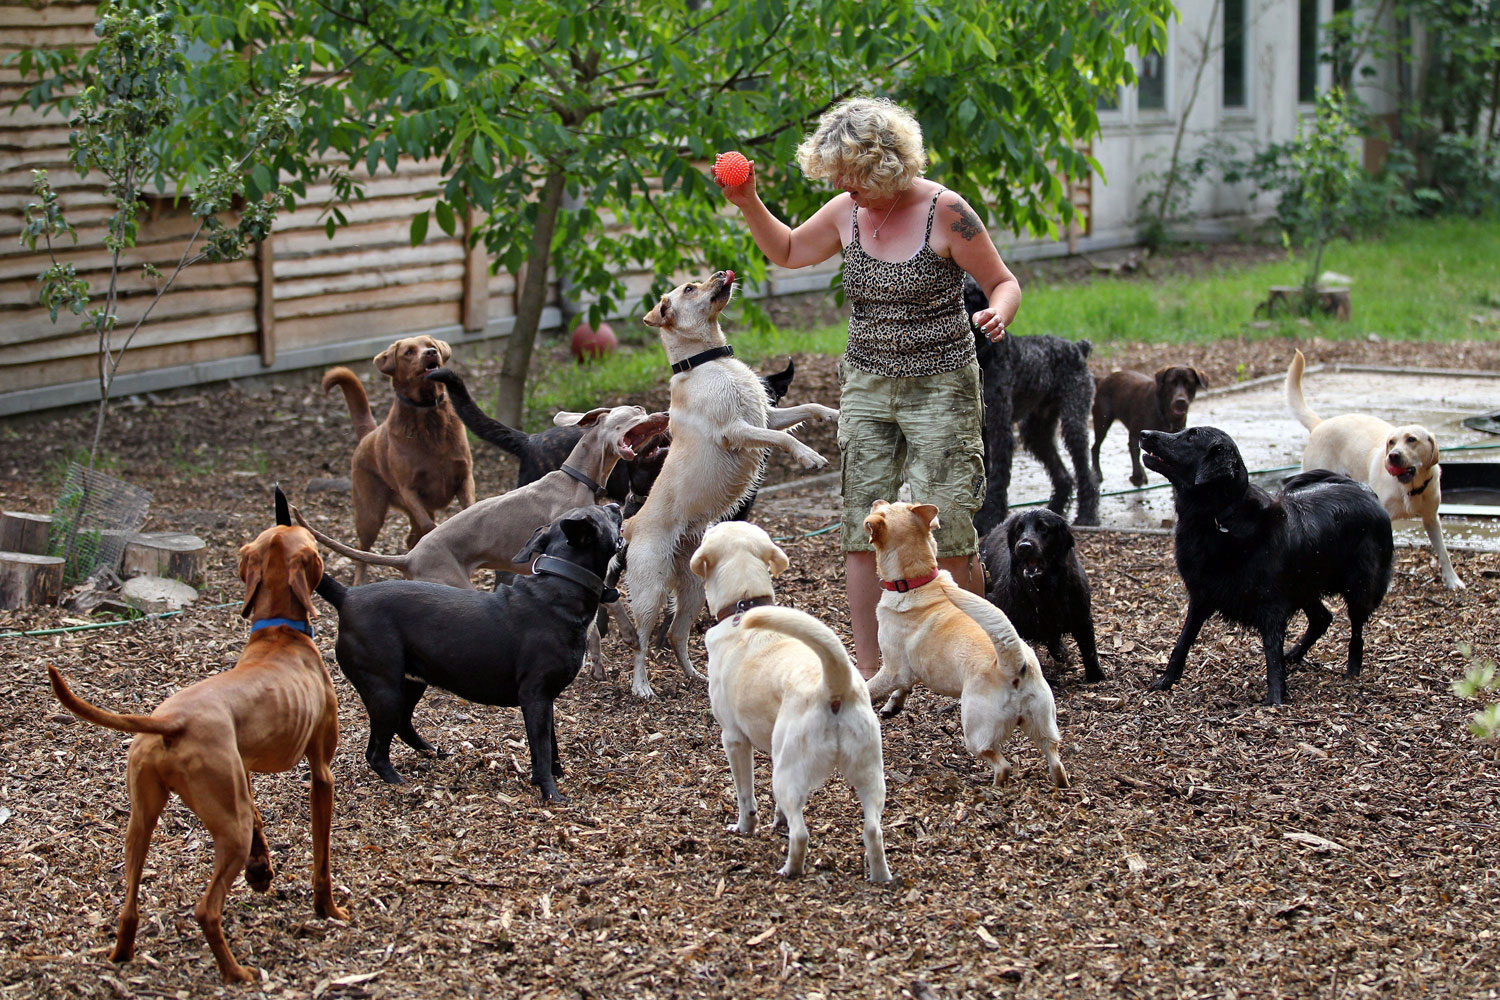 Dog physiotherapist Petra Rudolph plays with the dogs in their dog kindergarten in Leipzig, Germany. Mrs. Rudolph provides a full-time care for dogs usually left bored in their apartments.